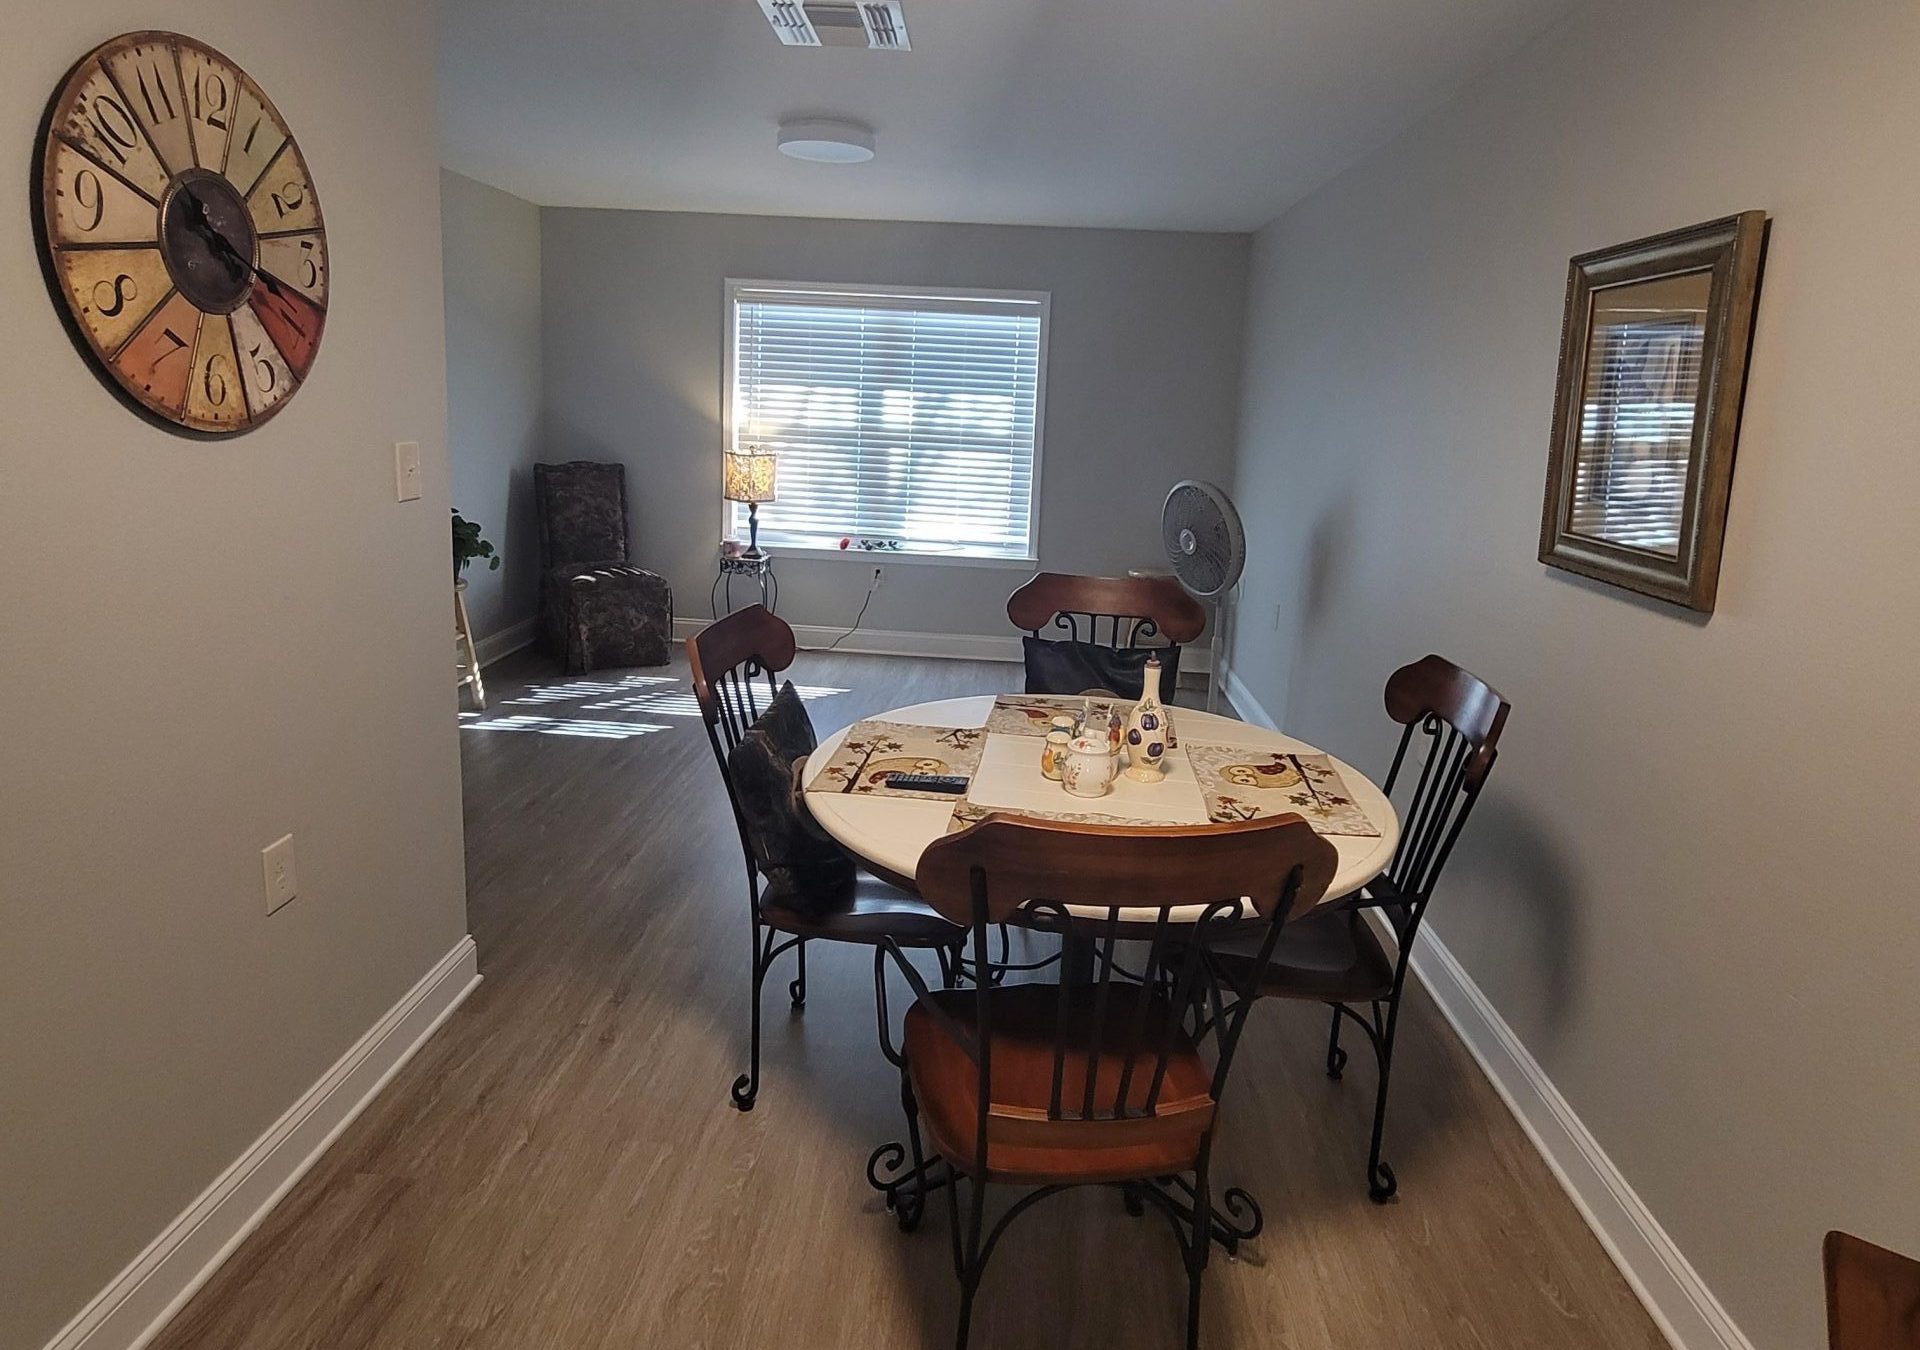 The dining room in a Mid-Tule Village independent living home